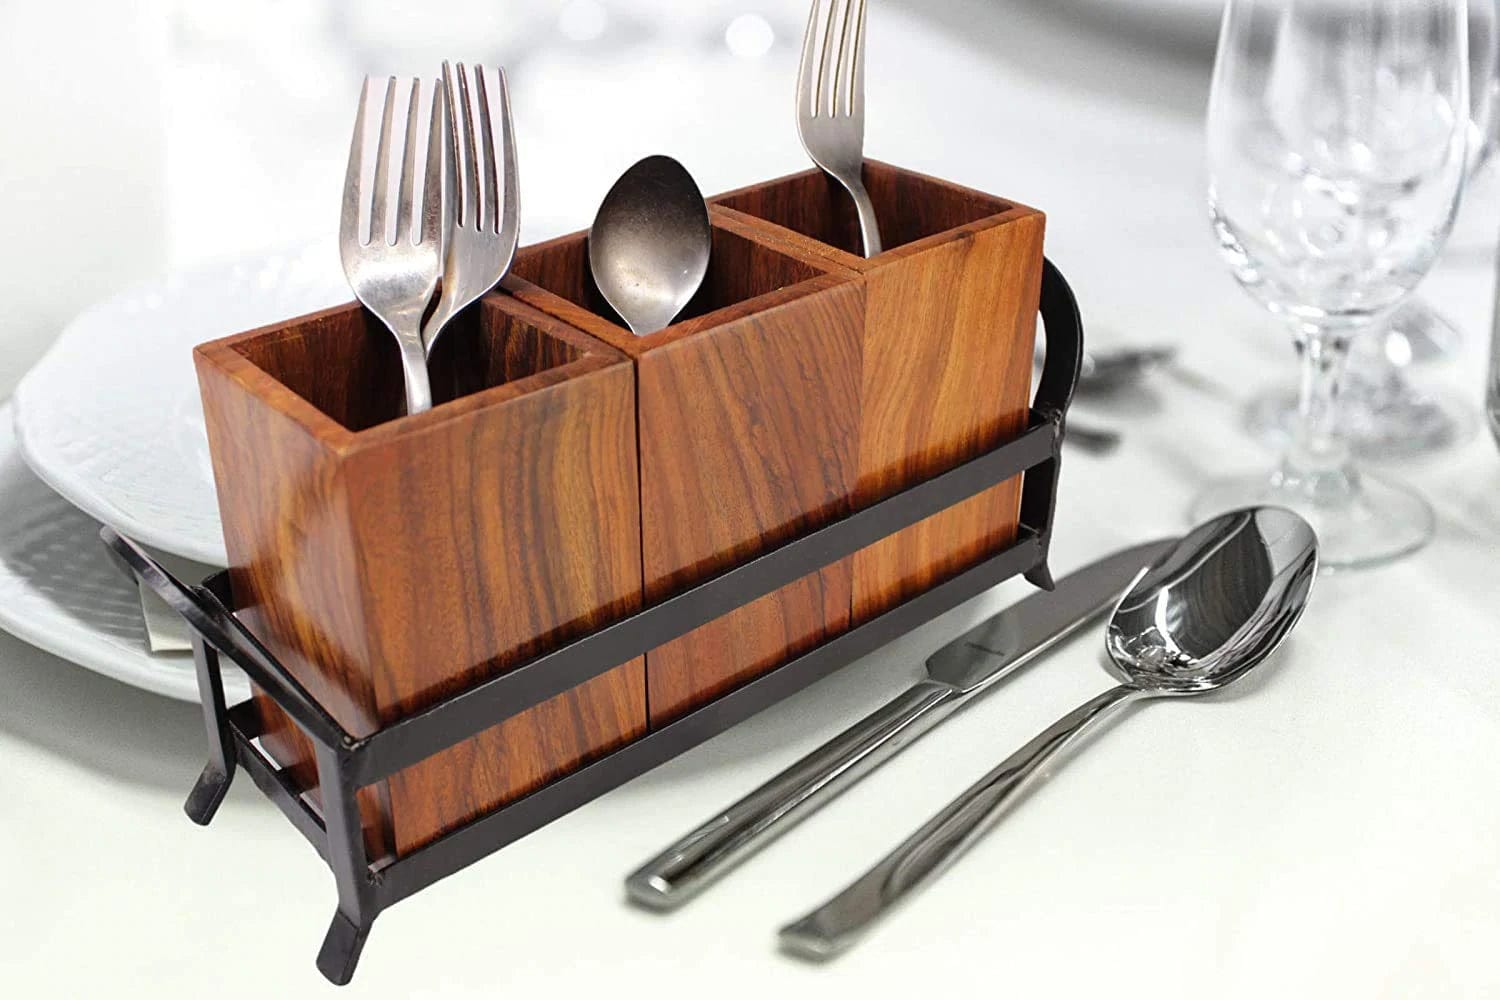 WOODEN & IRON CUTLERY HOLDER/TABLE ORGANIZER/MULTIPURPOSE STAND